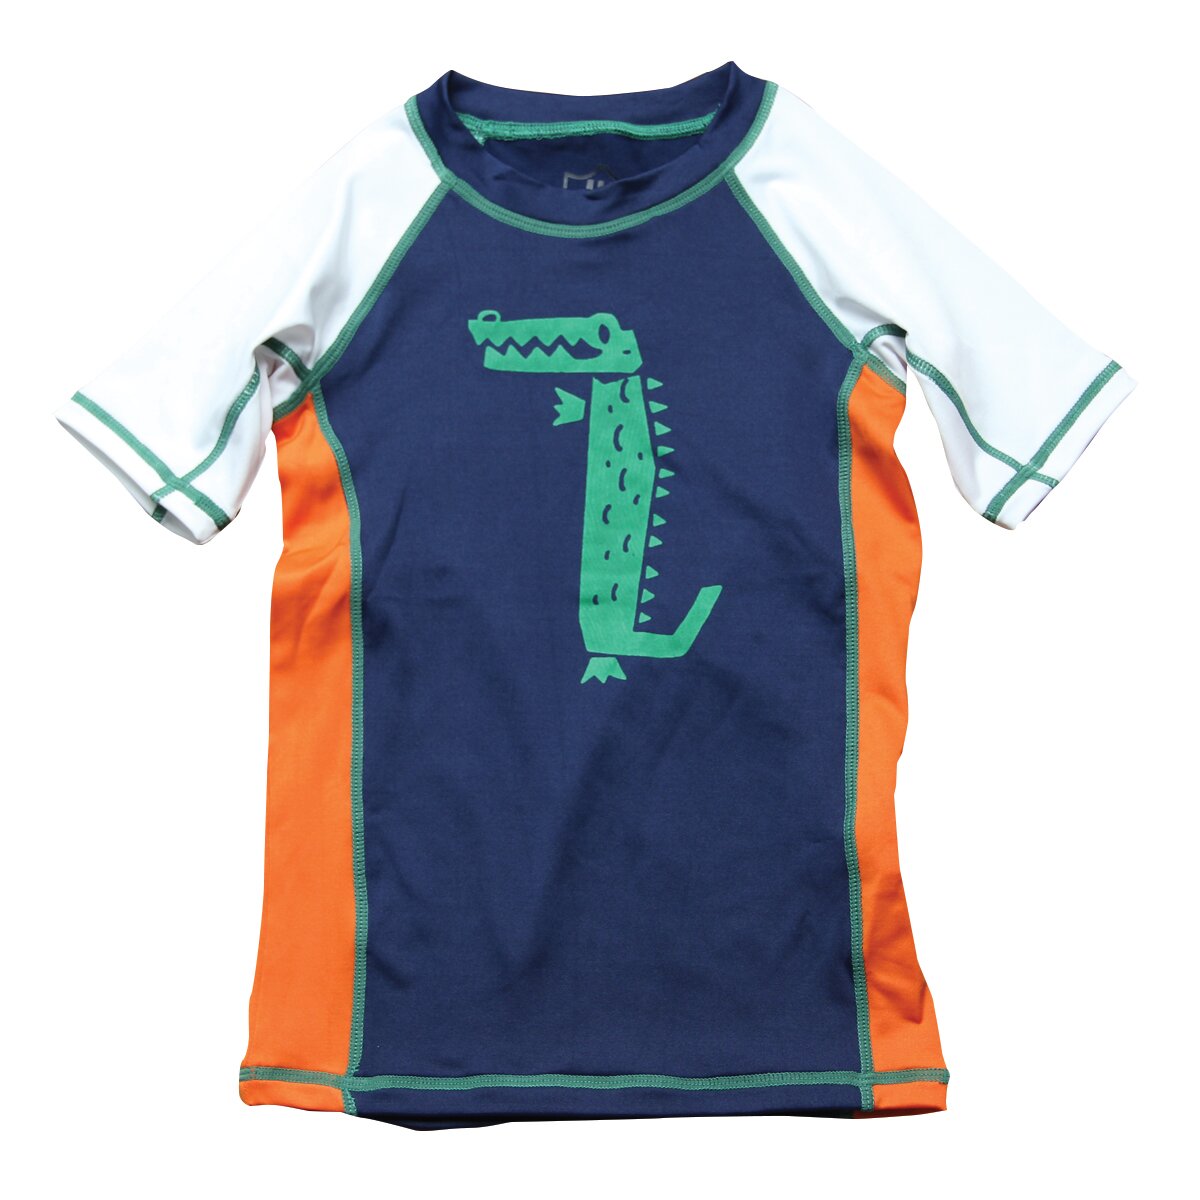 Boys Rash Guards by Wes and Willy - Navy and White Hungry Gator (Size: L(14/16))